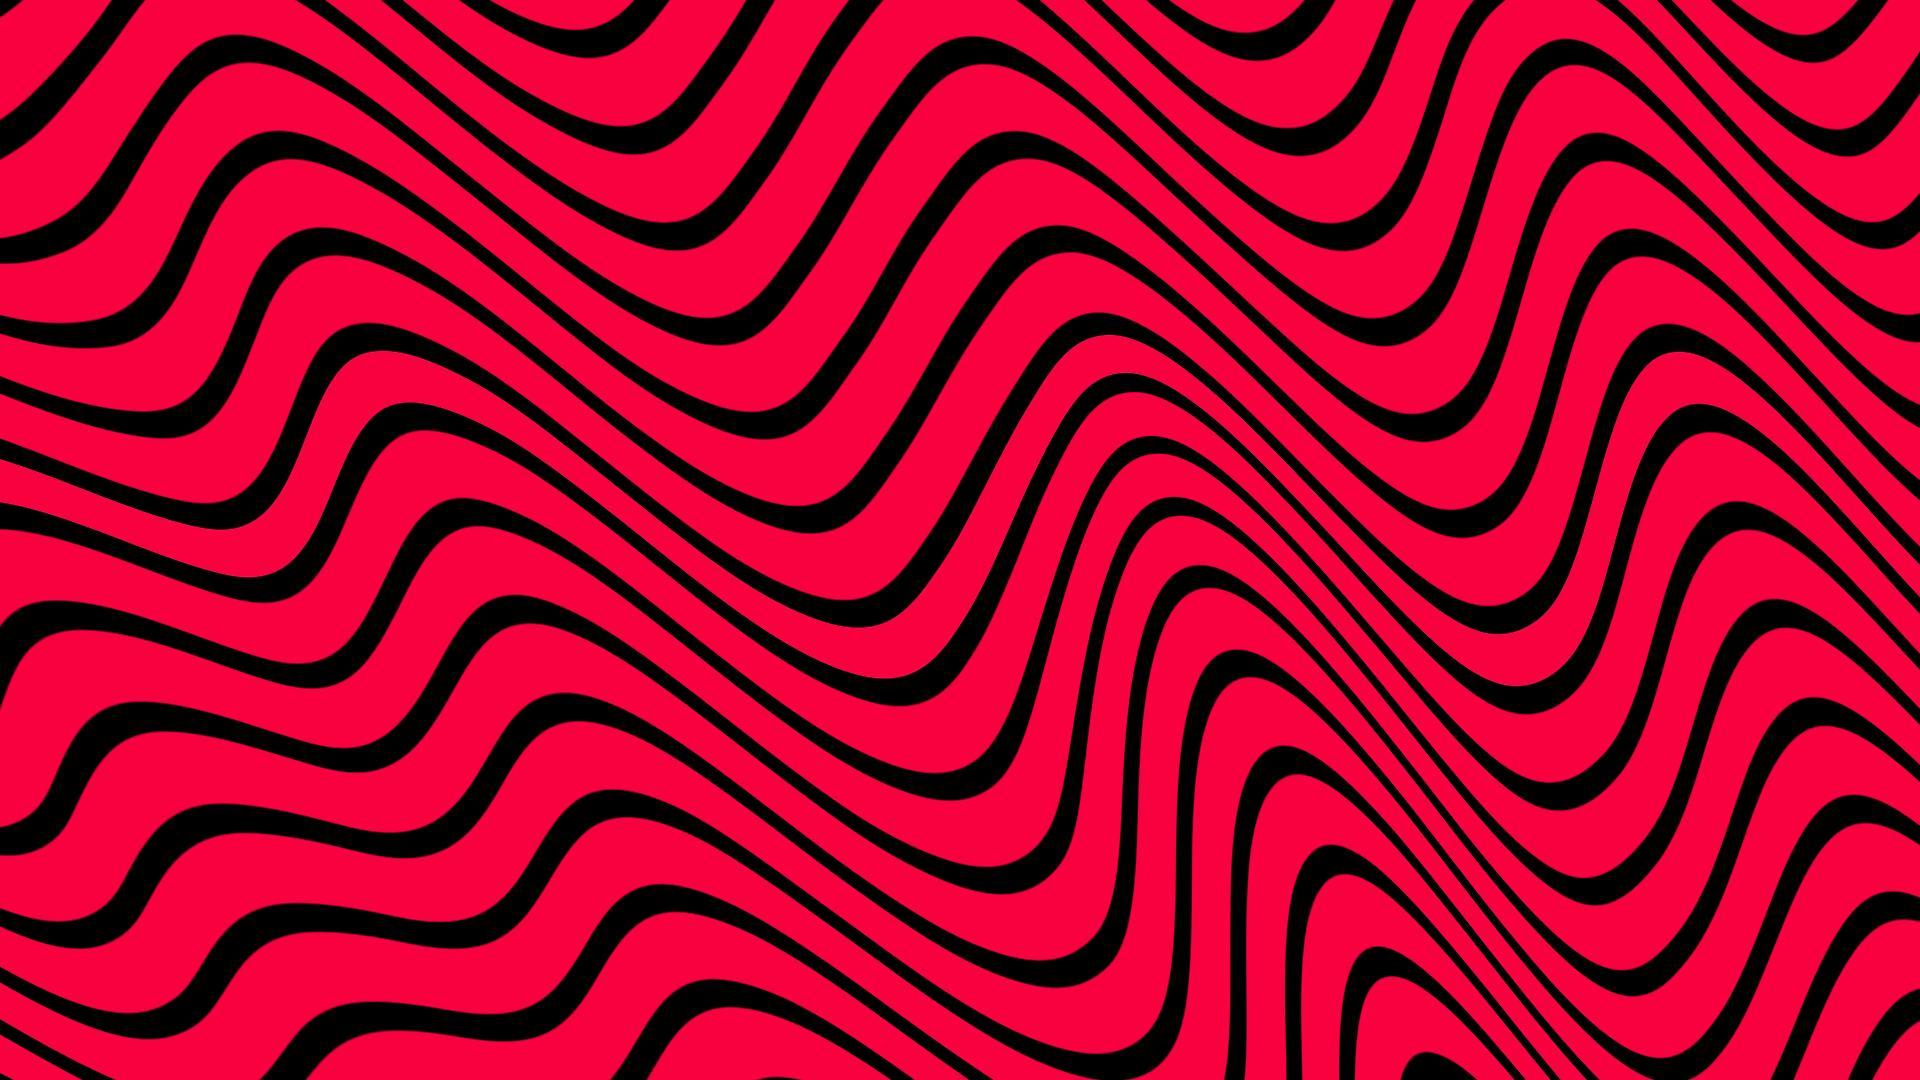 I made this PewDiePie's wavy background! You can use it to your